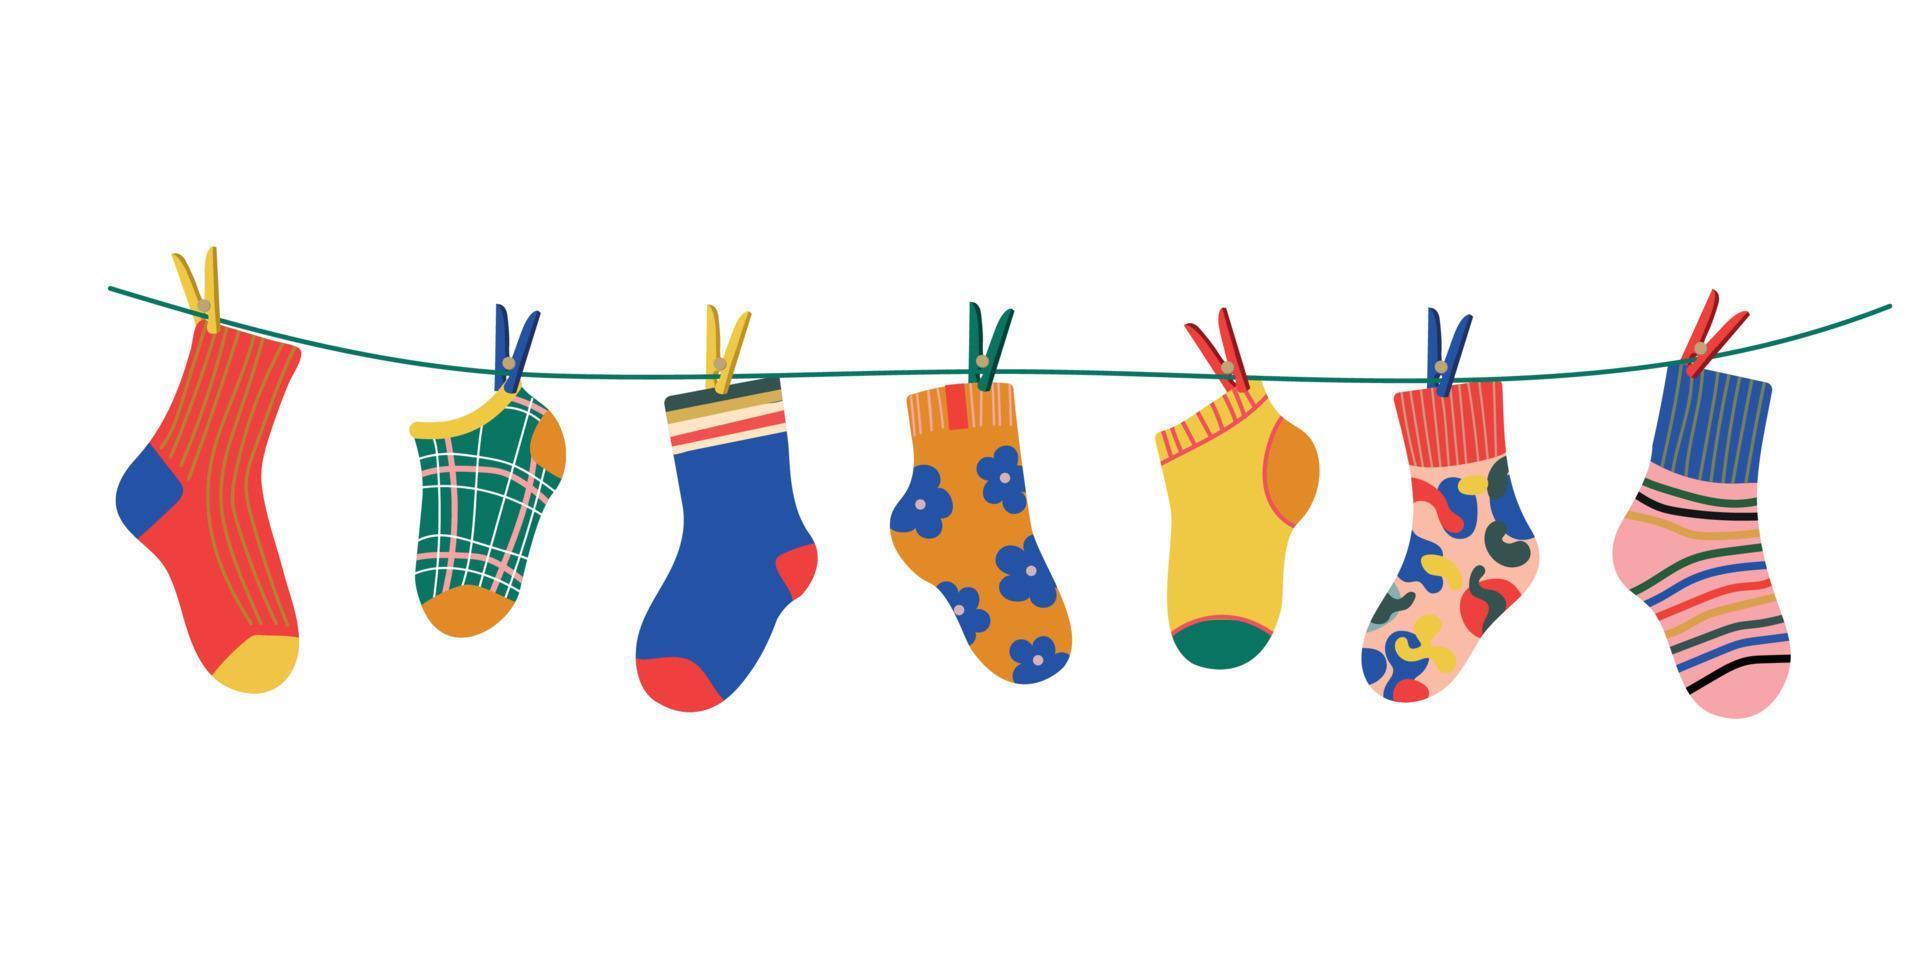 https://static.vecteezy.com/system/resources/previews/020/308/482/non_2x/socks-on-a-rope-with-colored-clothespins-dry-a-cotton-or-wool-sock-and-hang-it-on-a-clothesline-with-clothespins-baby-socks-with-textures-and-patterns-cartoon-illustration-of-woolen-and-cott-vector.jpg